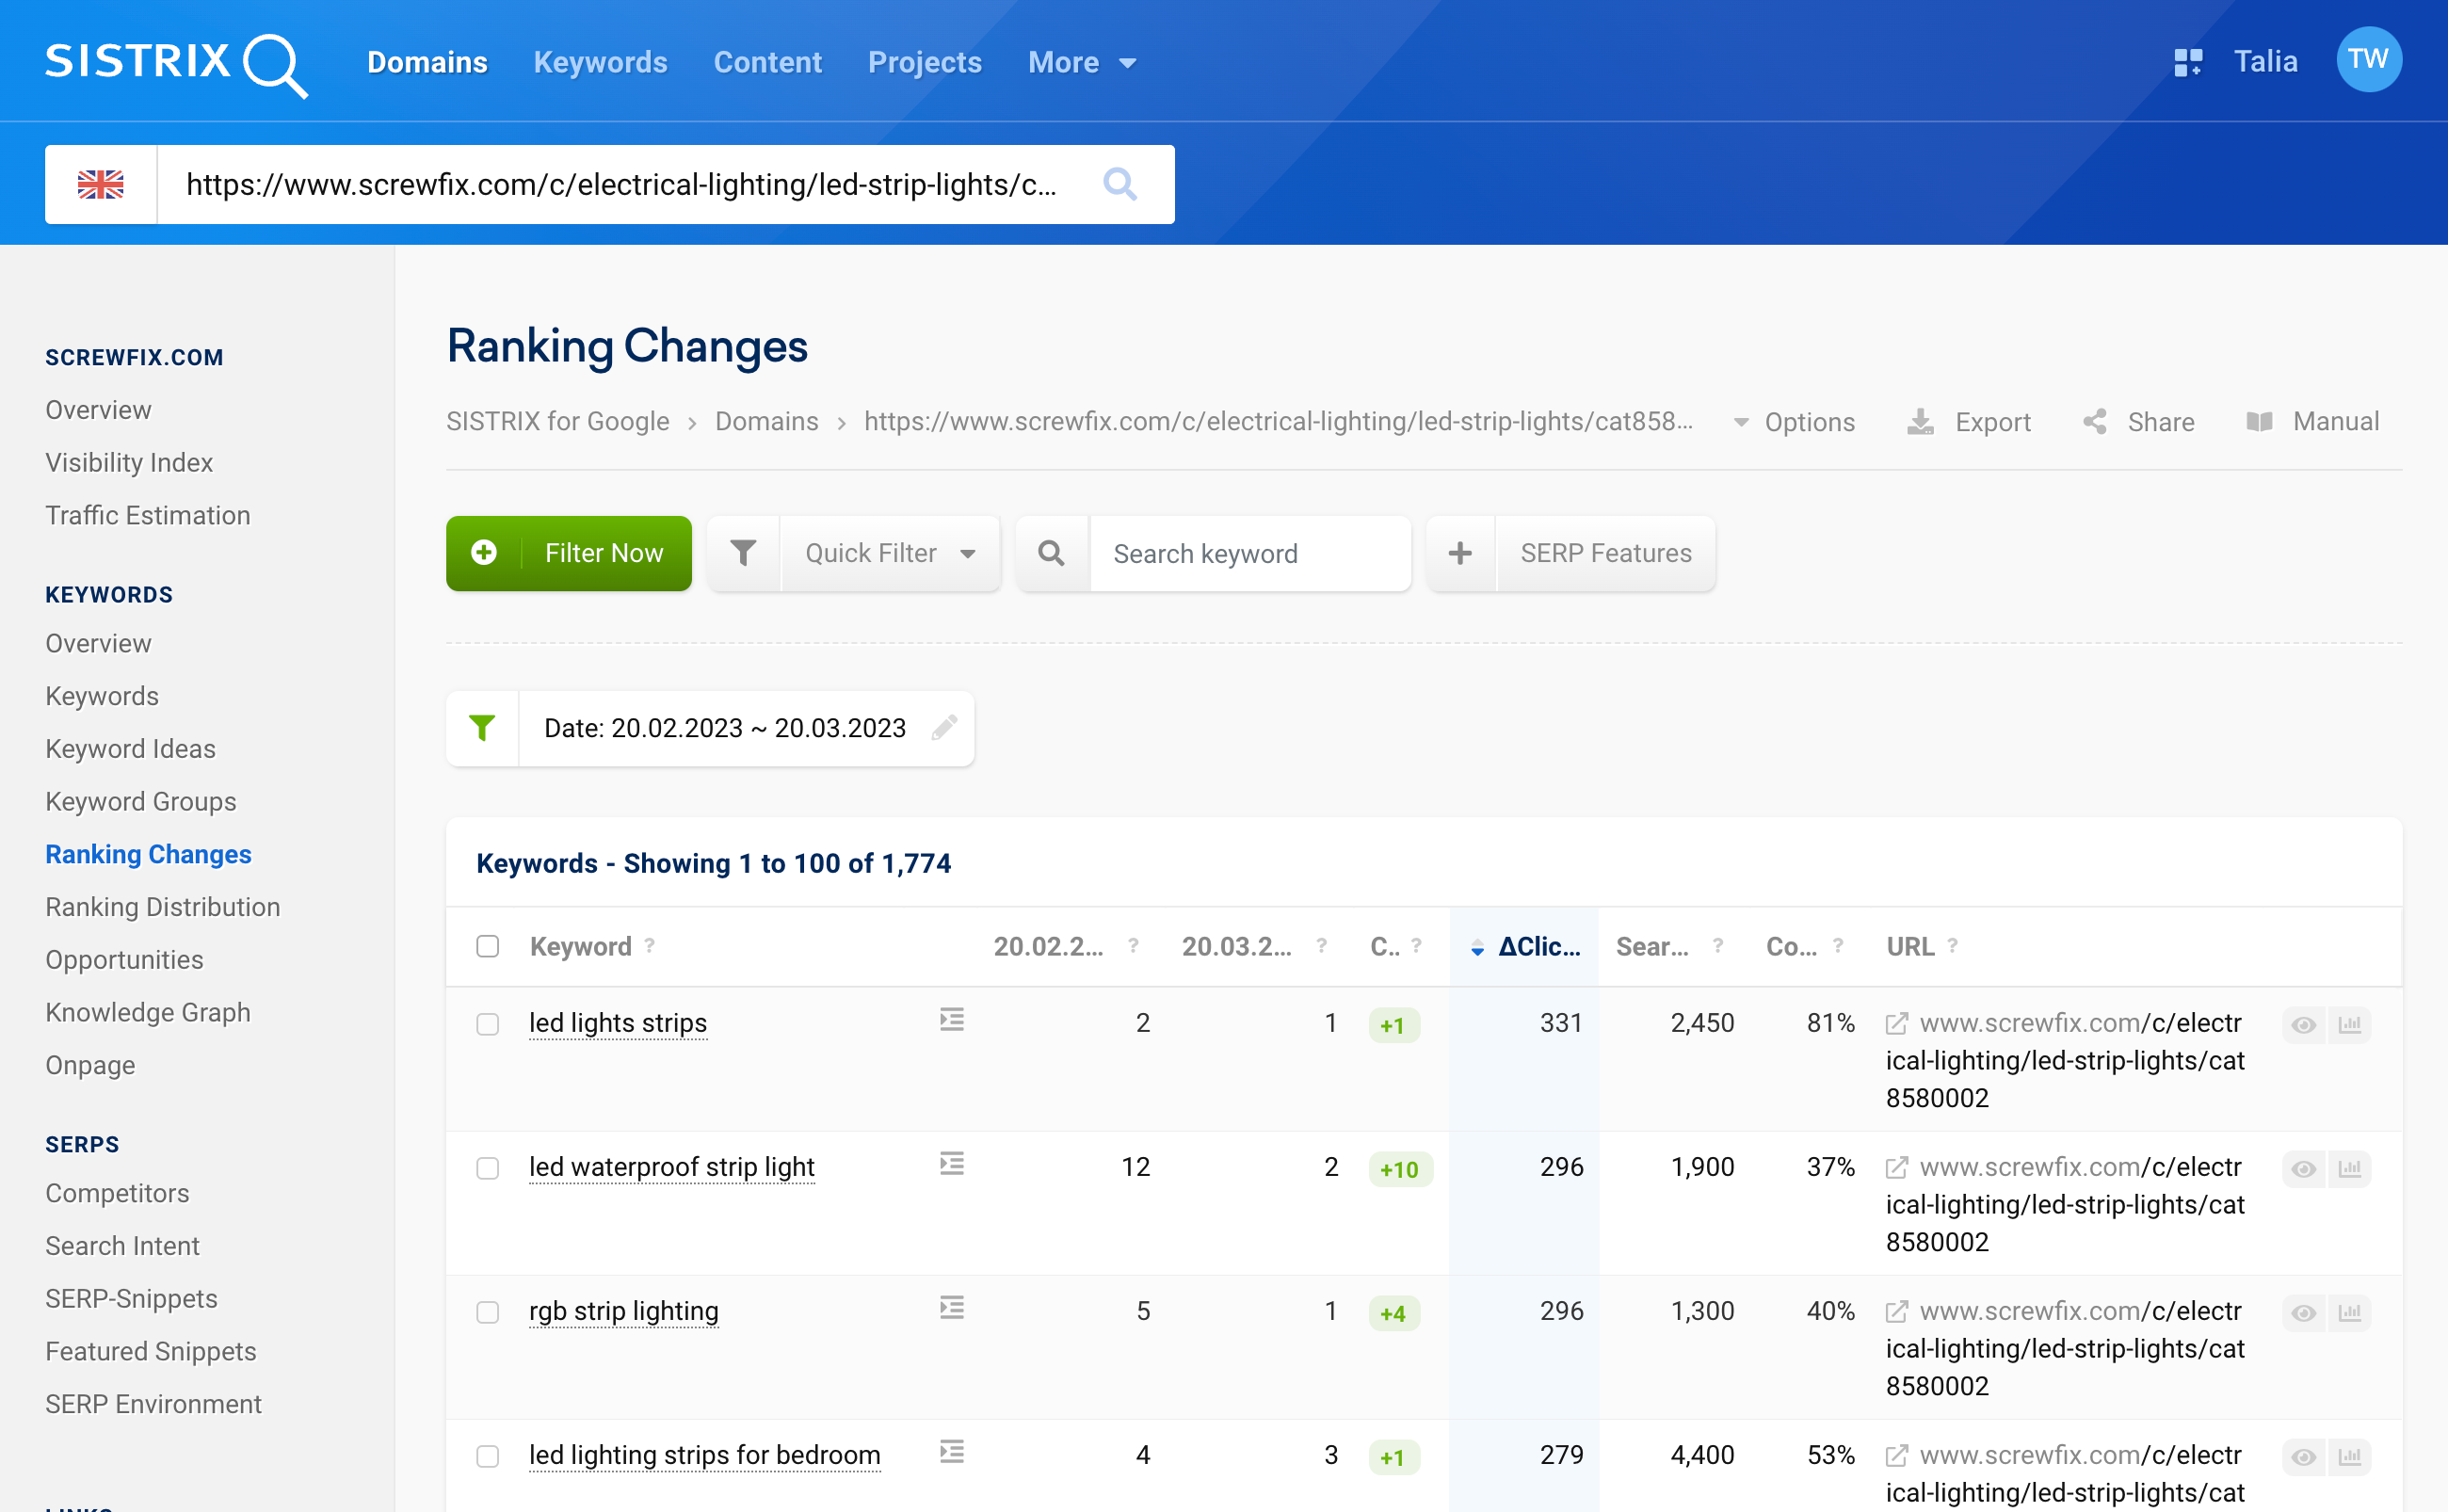 View of the Ranking Changes page in SISTRIX when entering a single URL.